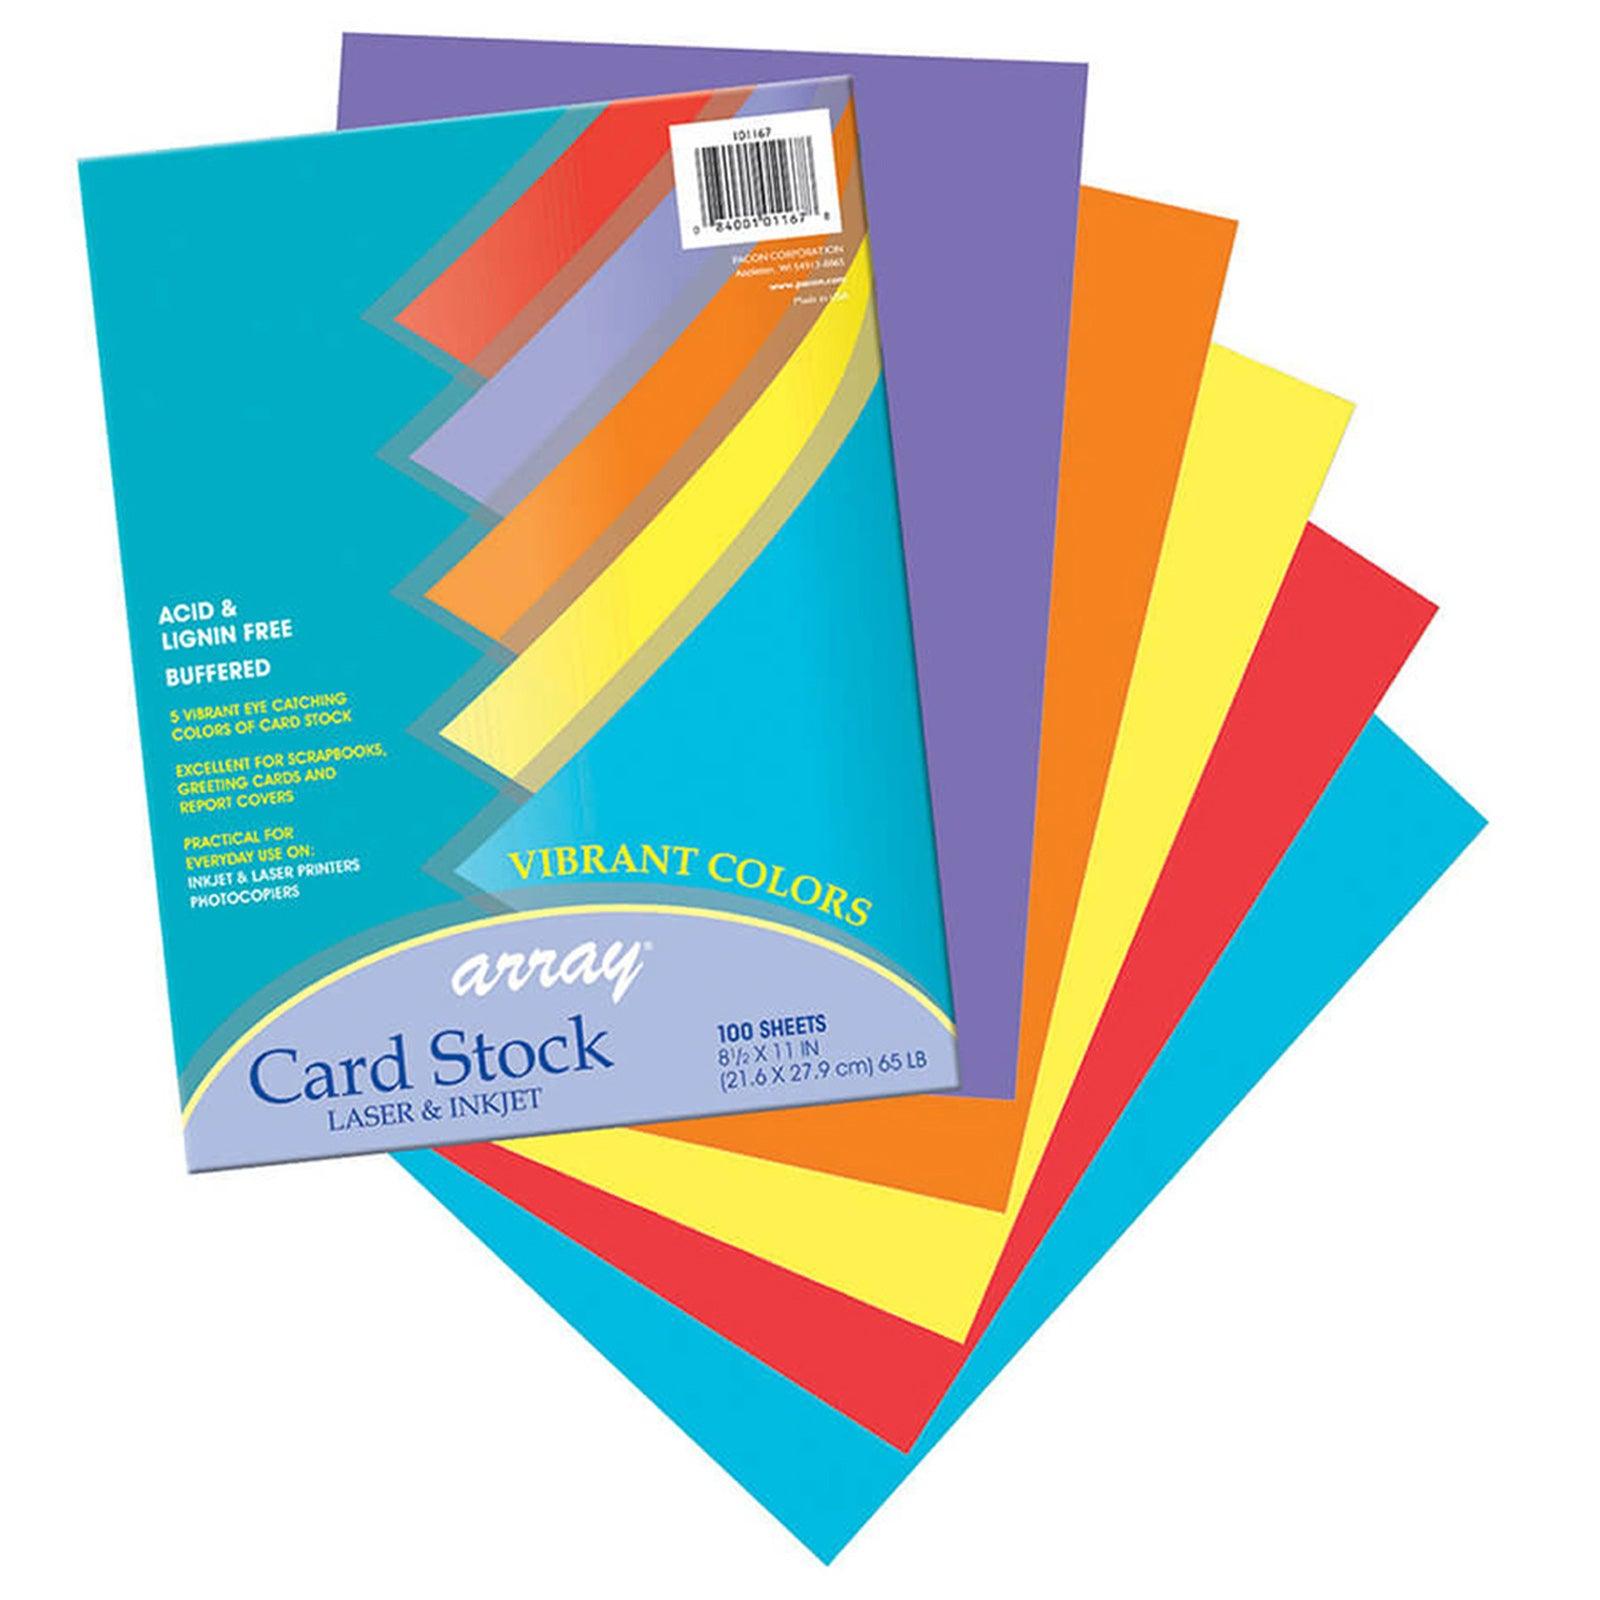 Vibrant Card Stock, 5 Assorted Colors, 8-1/2" x 11", 100 Sheets - Loomini